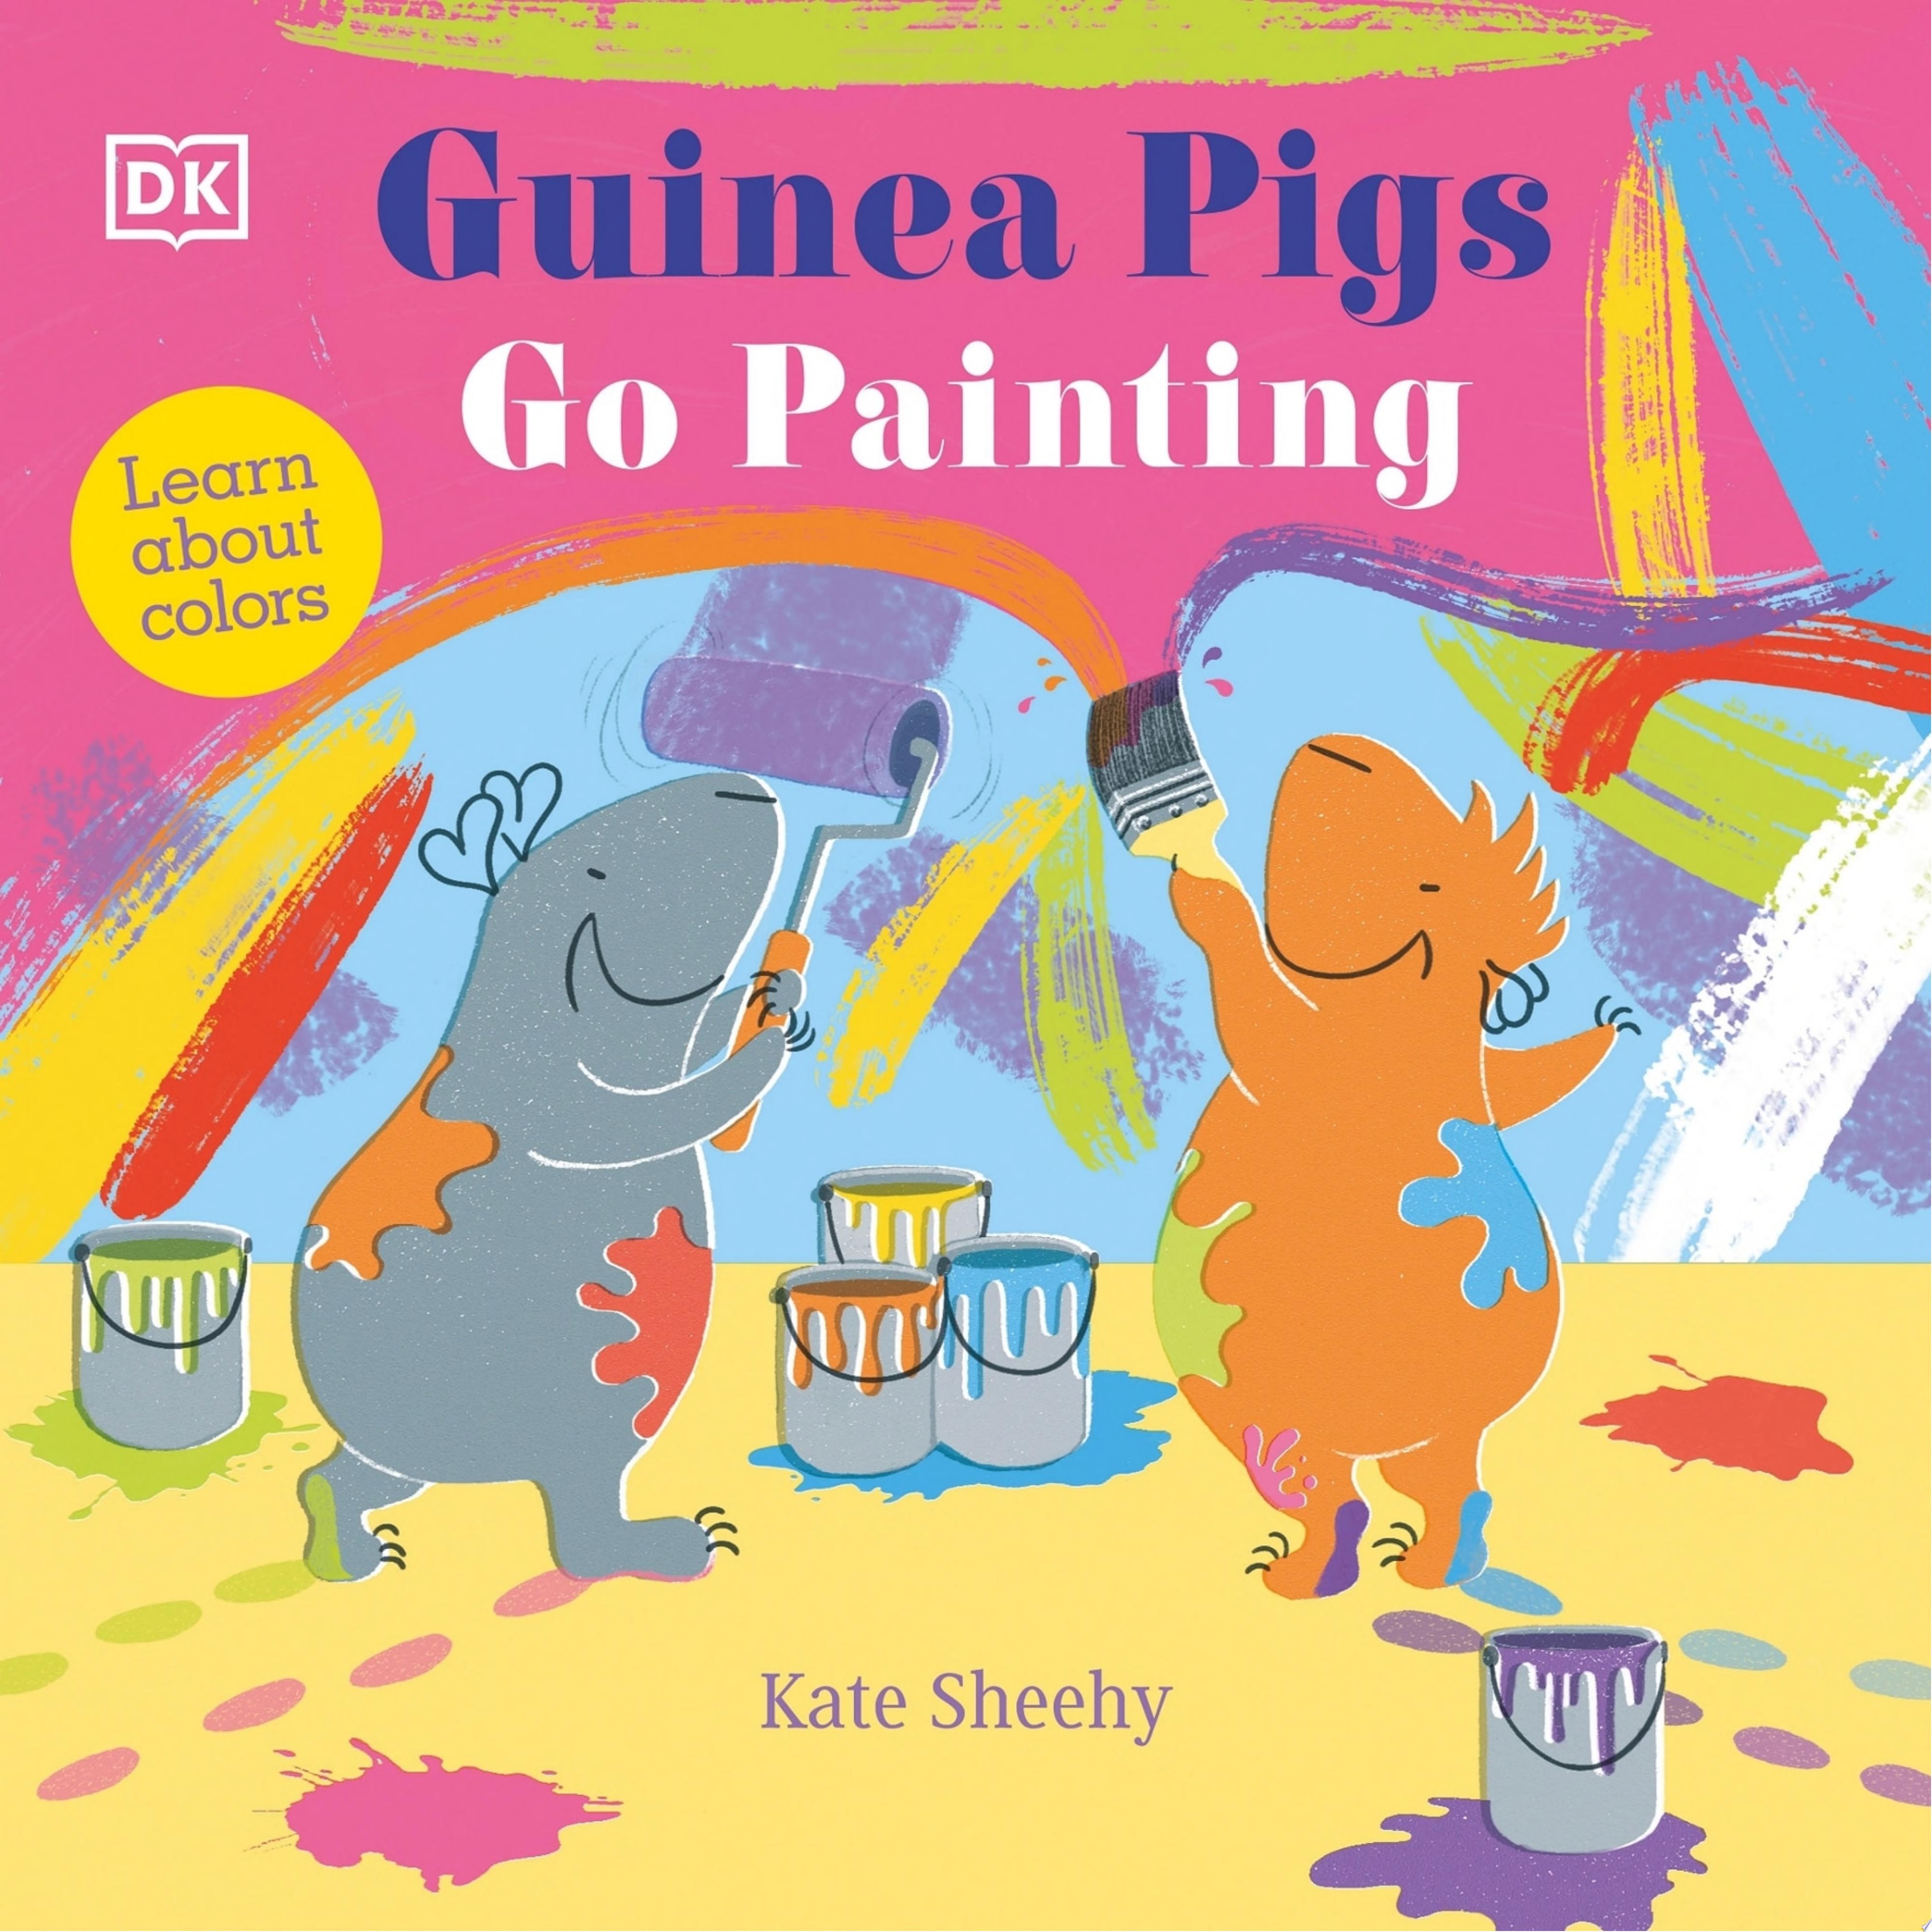 Image for "Guinea Pigs Go Painting"